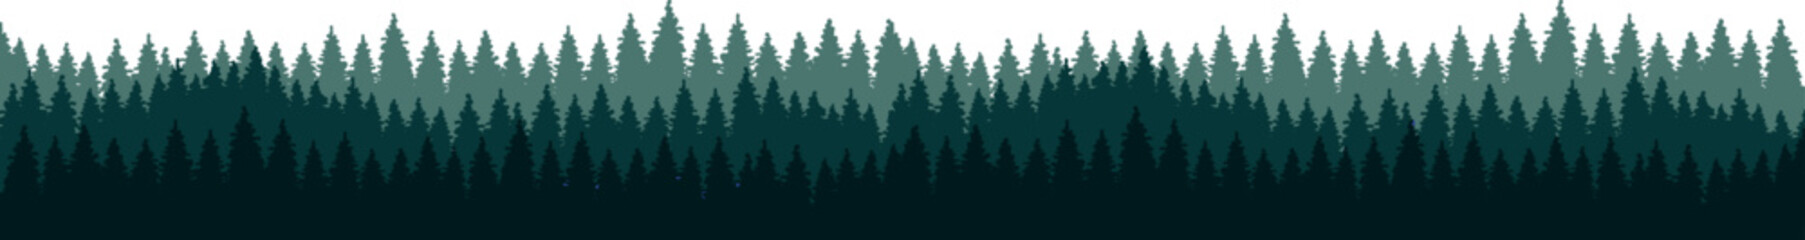 Vector green silhouettes of pine trees in the forest on a white background. panorama